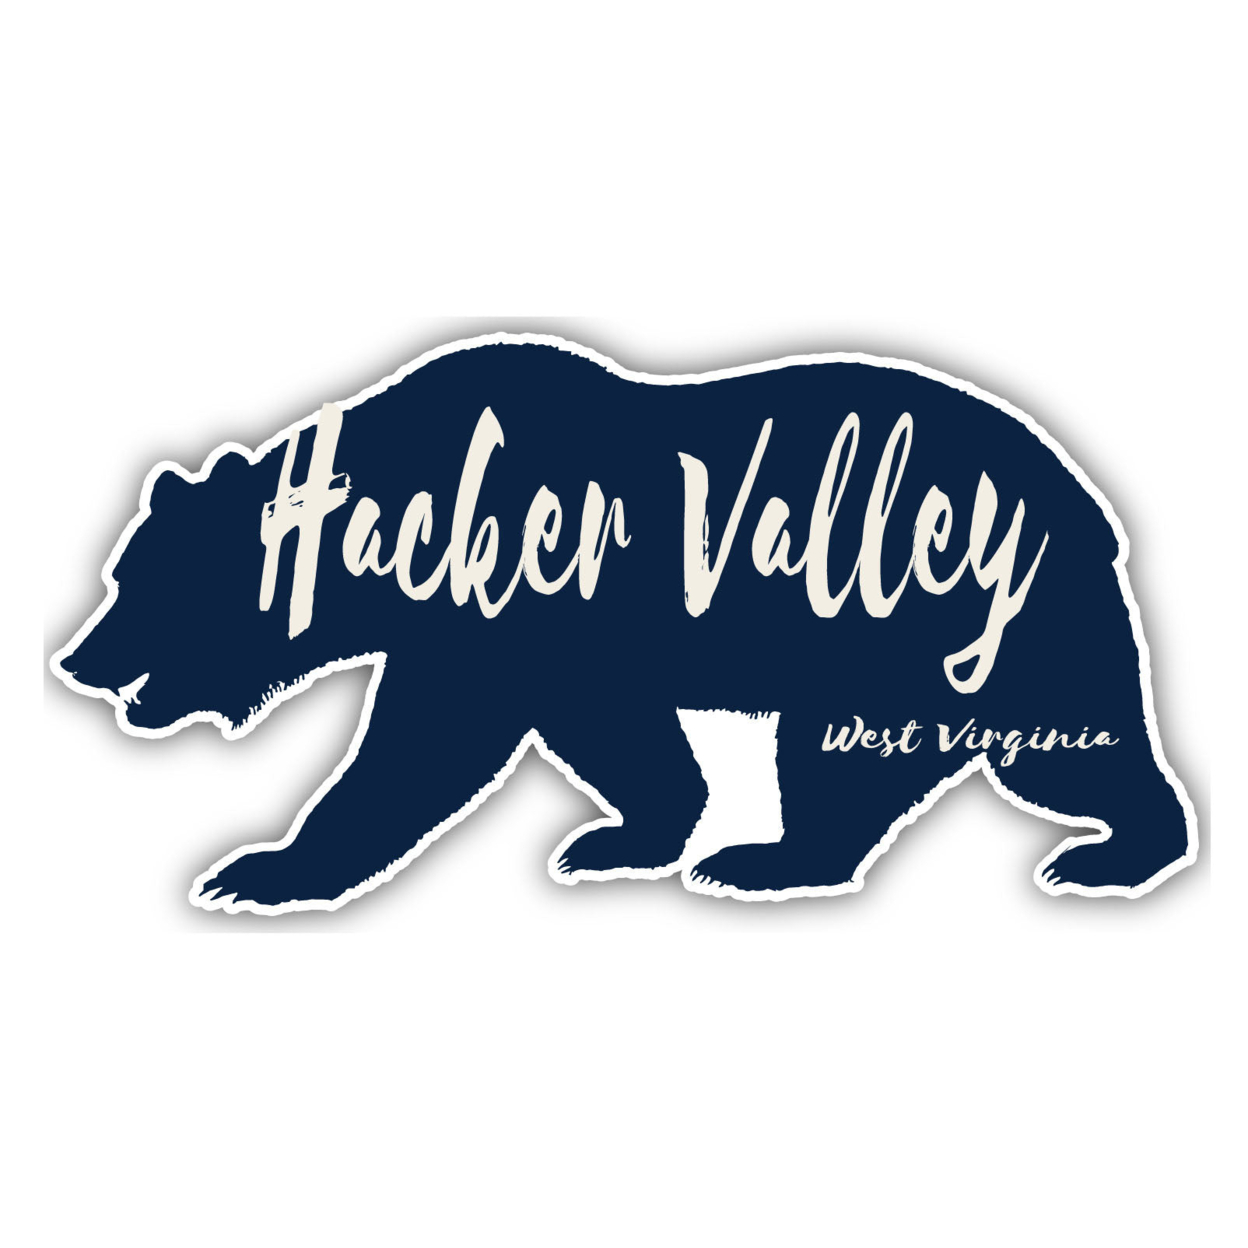 Hacker Valley West Virginia Souvenir Decorative Stickers (Choose Theme And Size) - Single Unit, 6-Inch, Great Outdoors